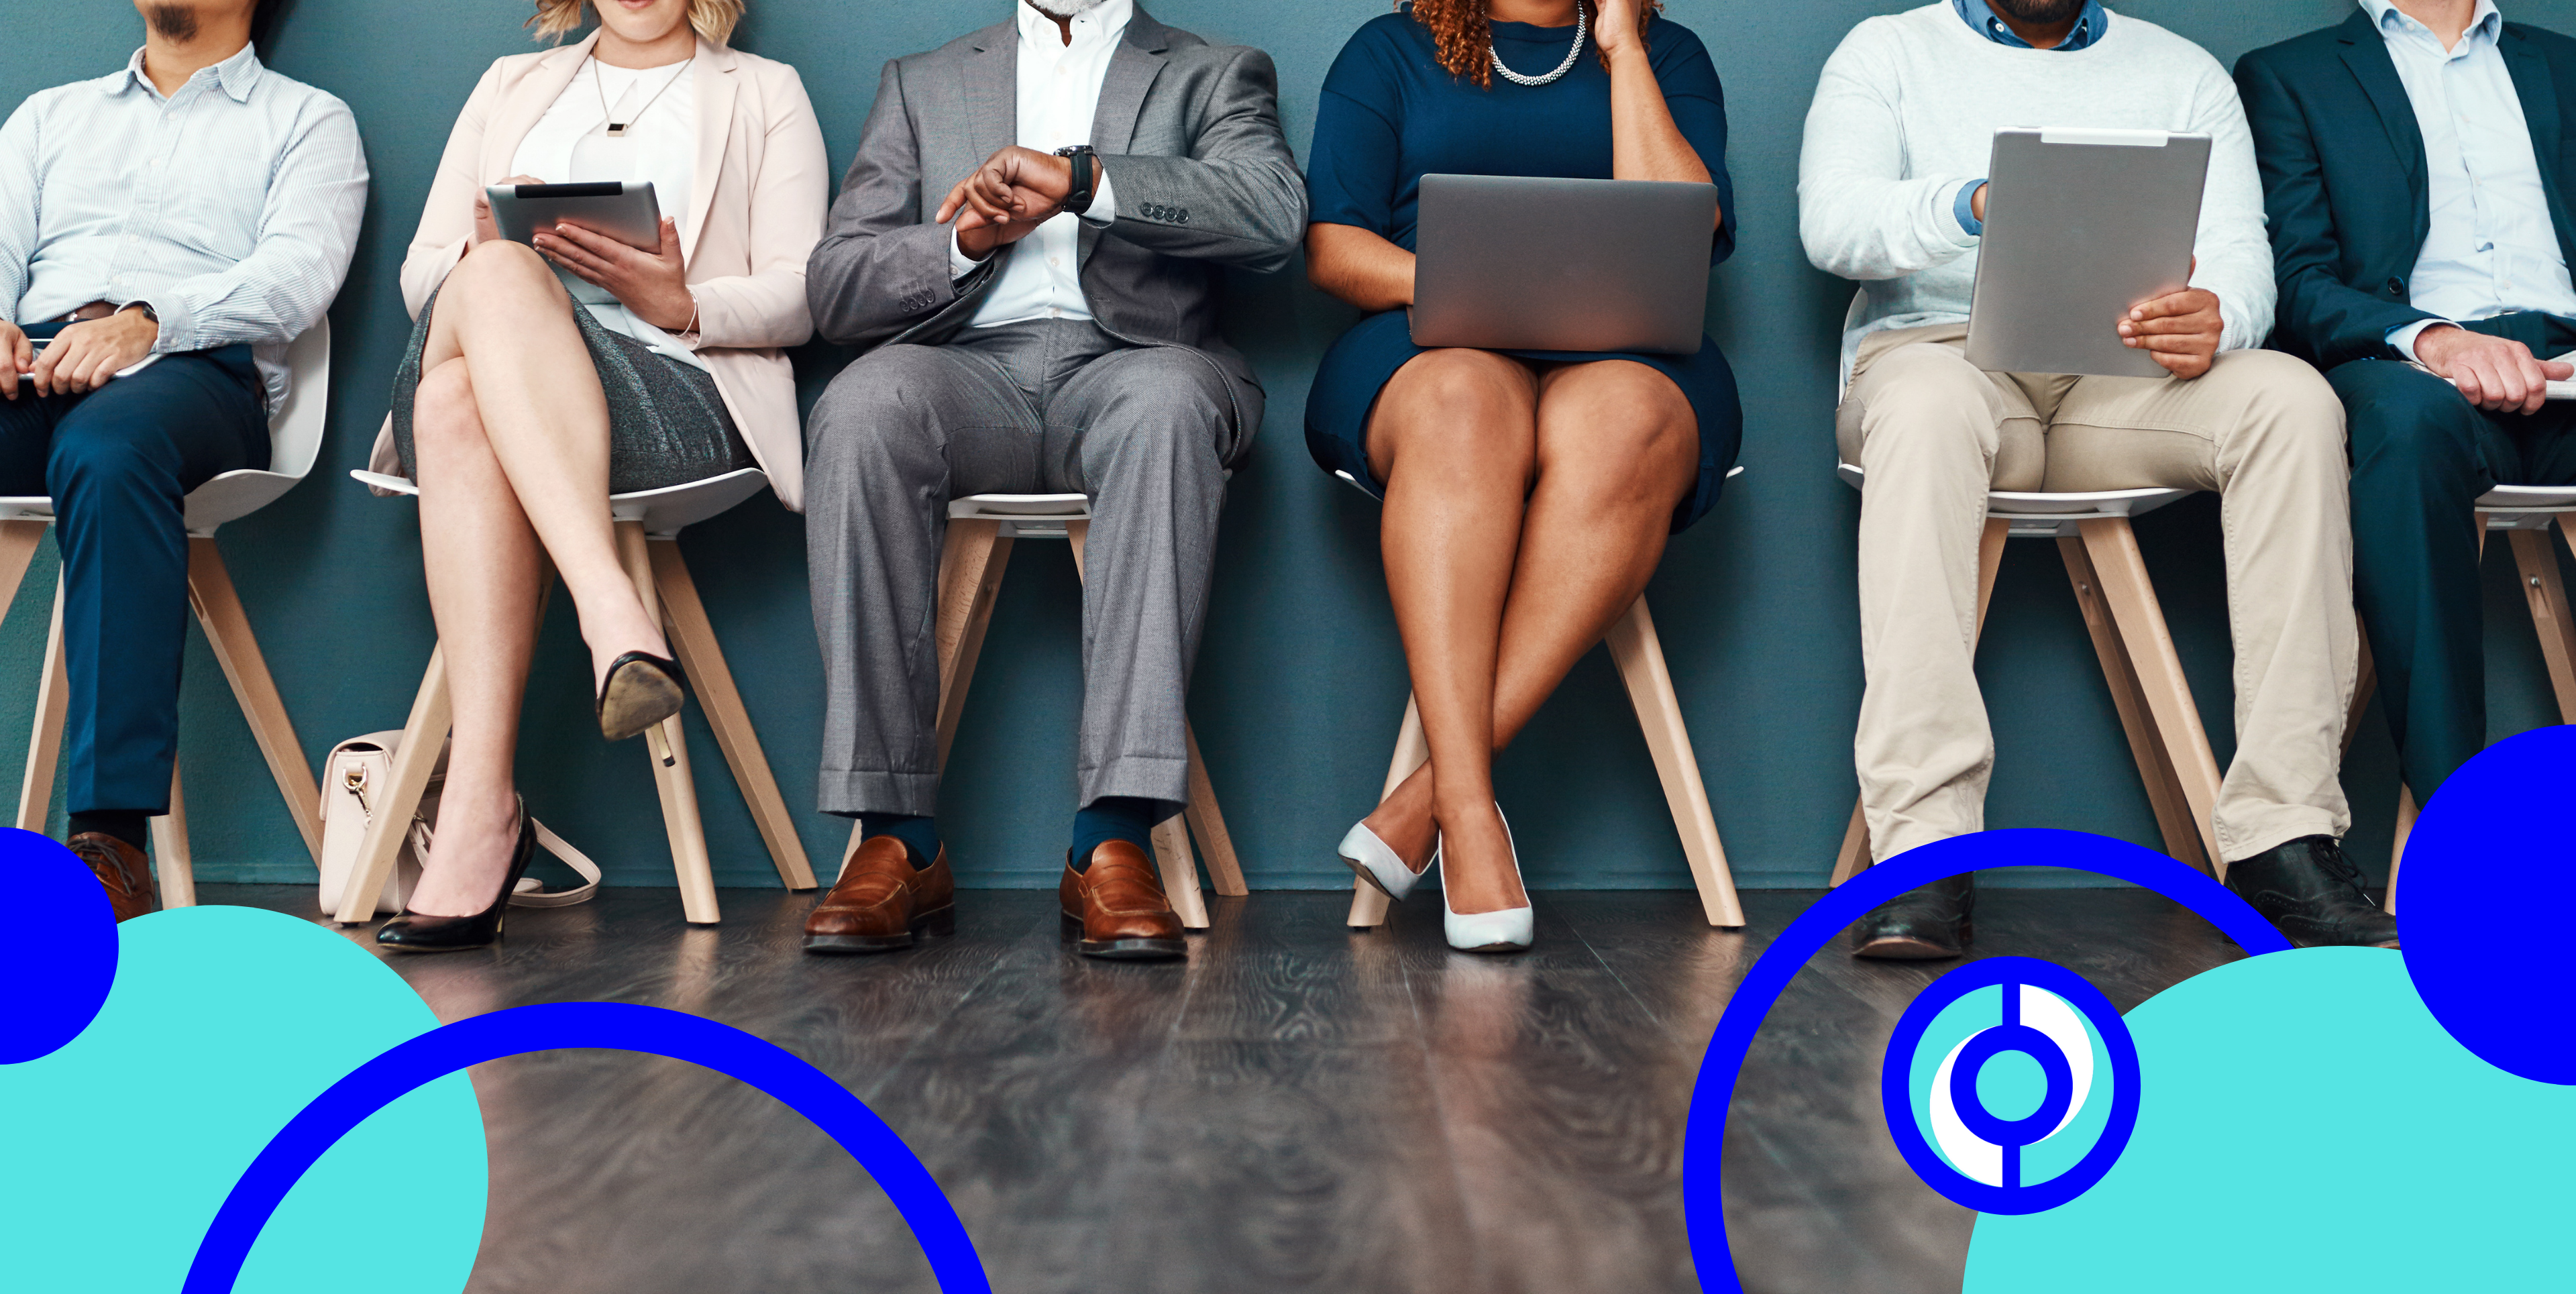 careercircle logo, diverse people sitting in a line of chairs on a wall, blue circles framing